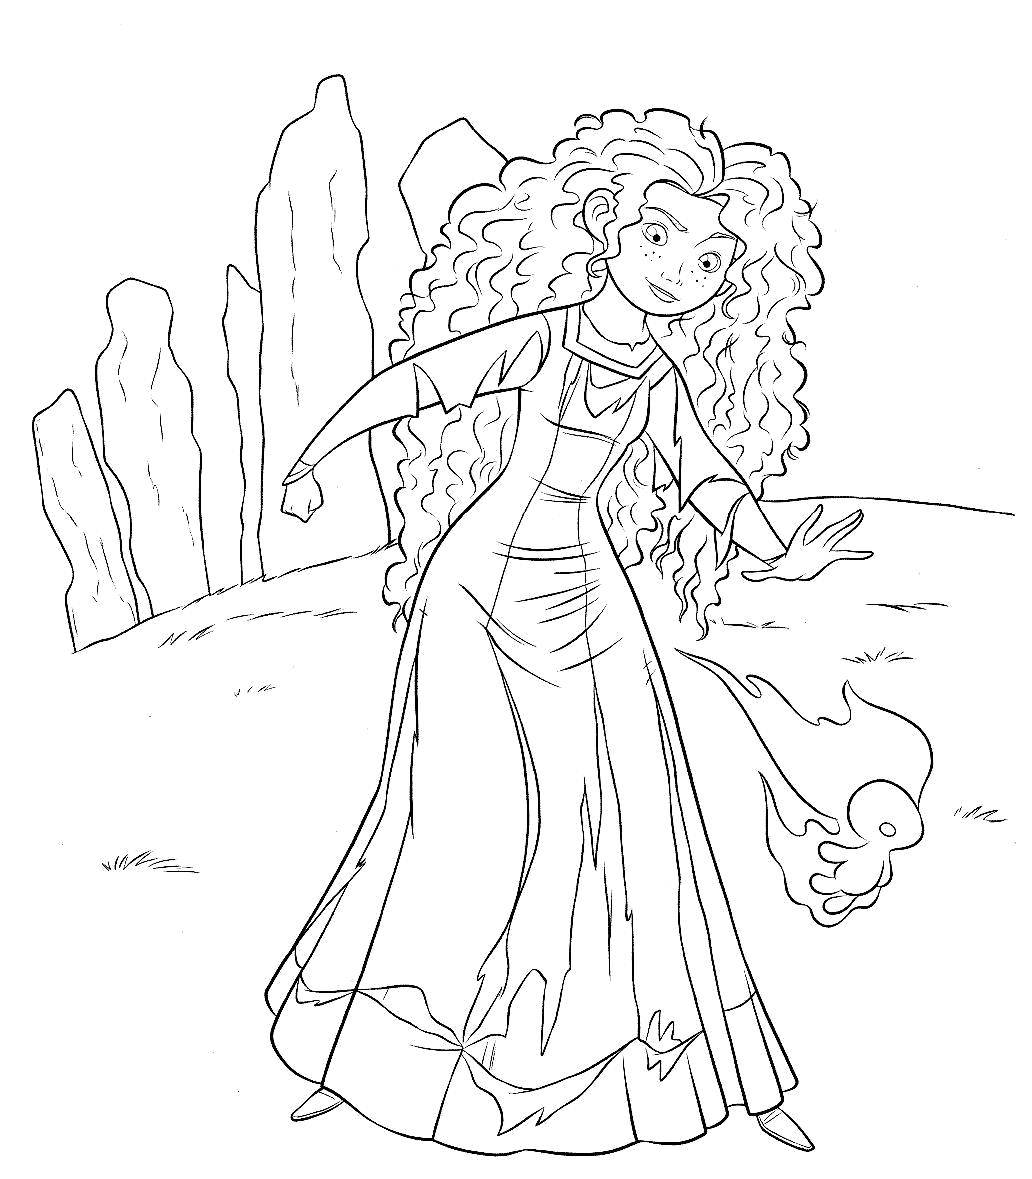 Coloring Merida. Category brave heart. Tags:  Cartoon character.